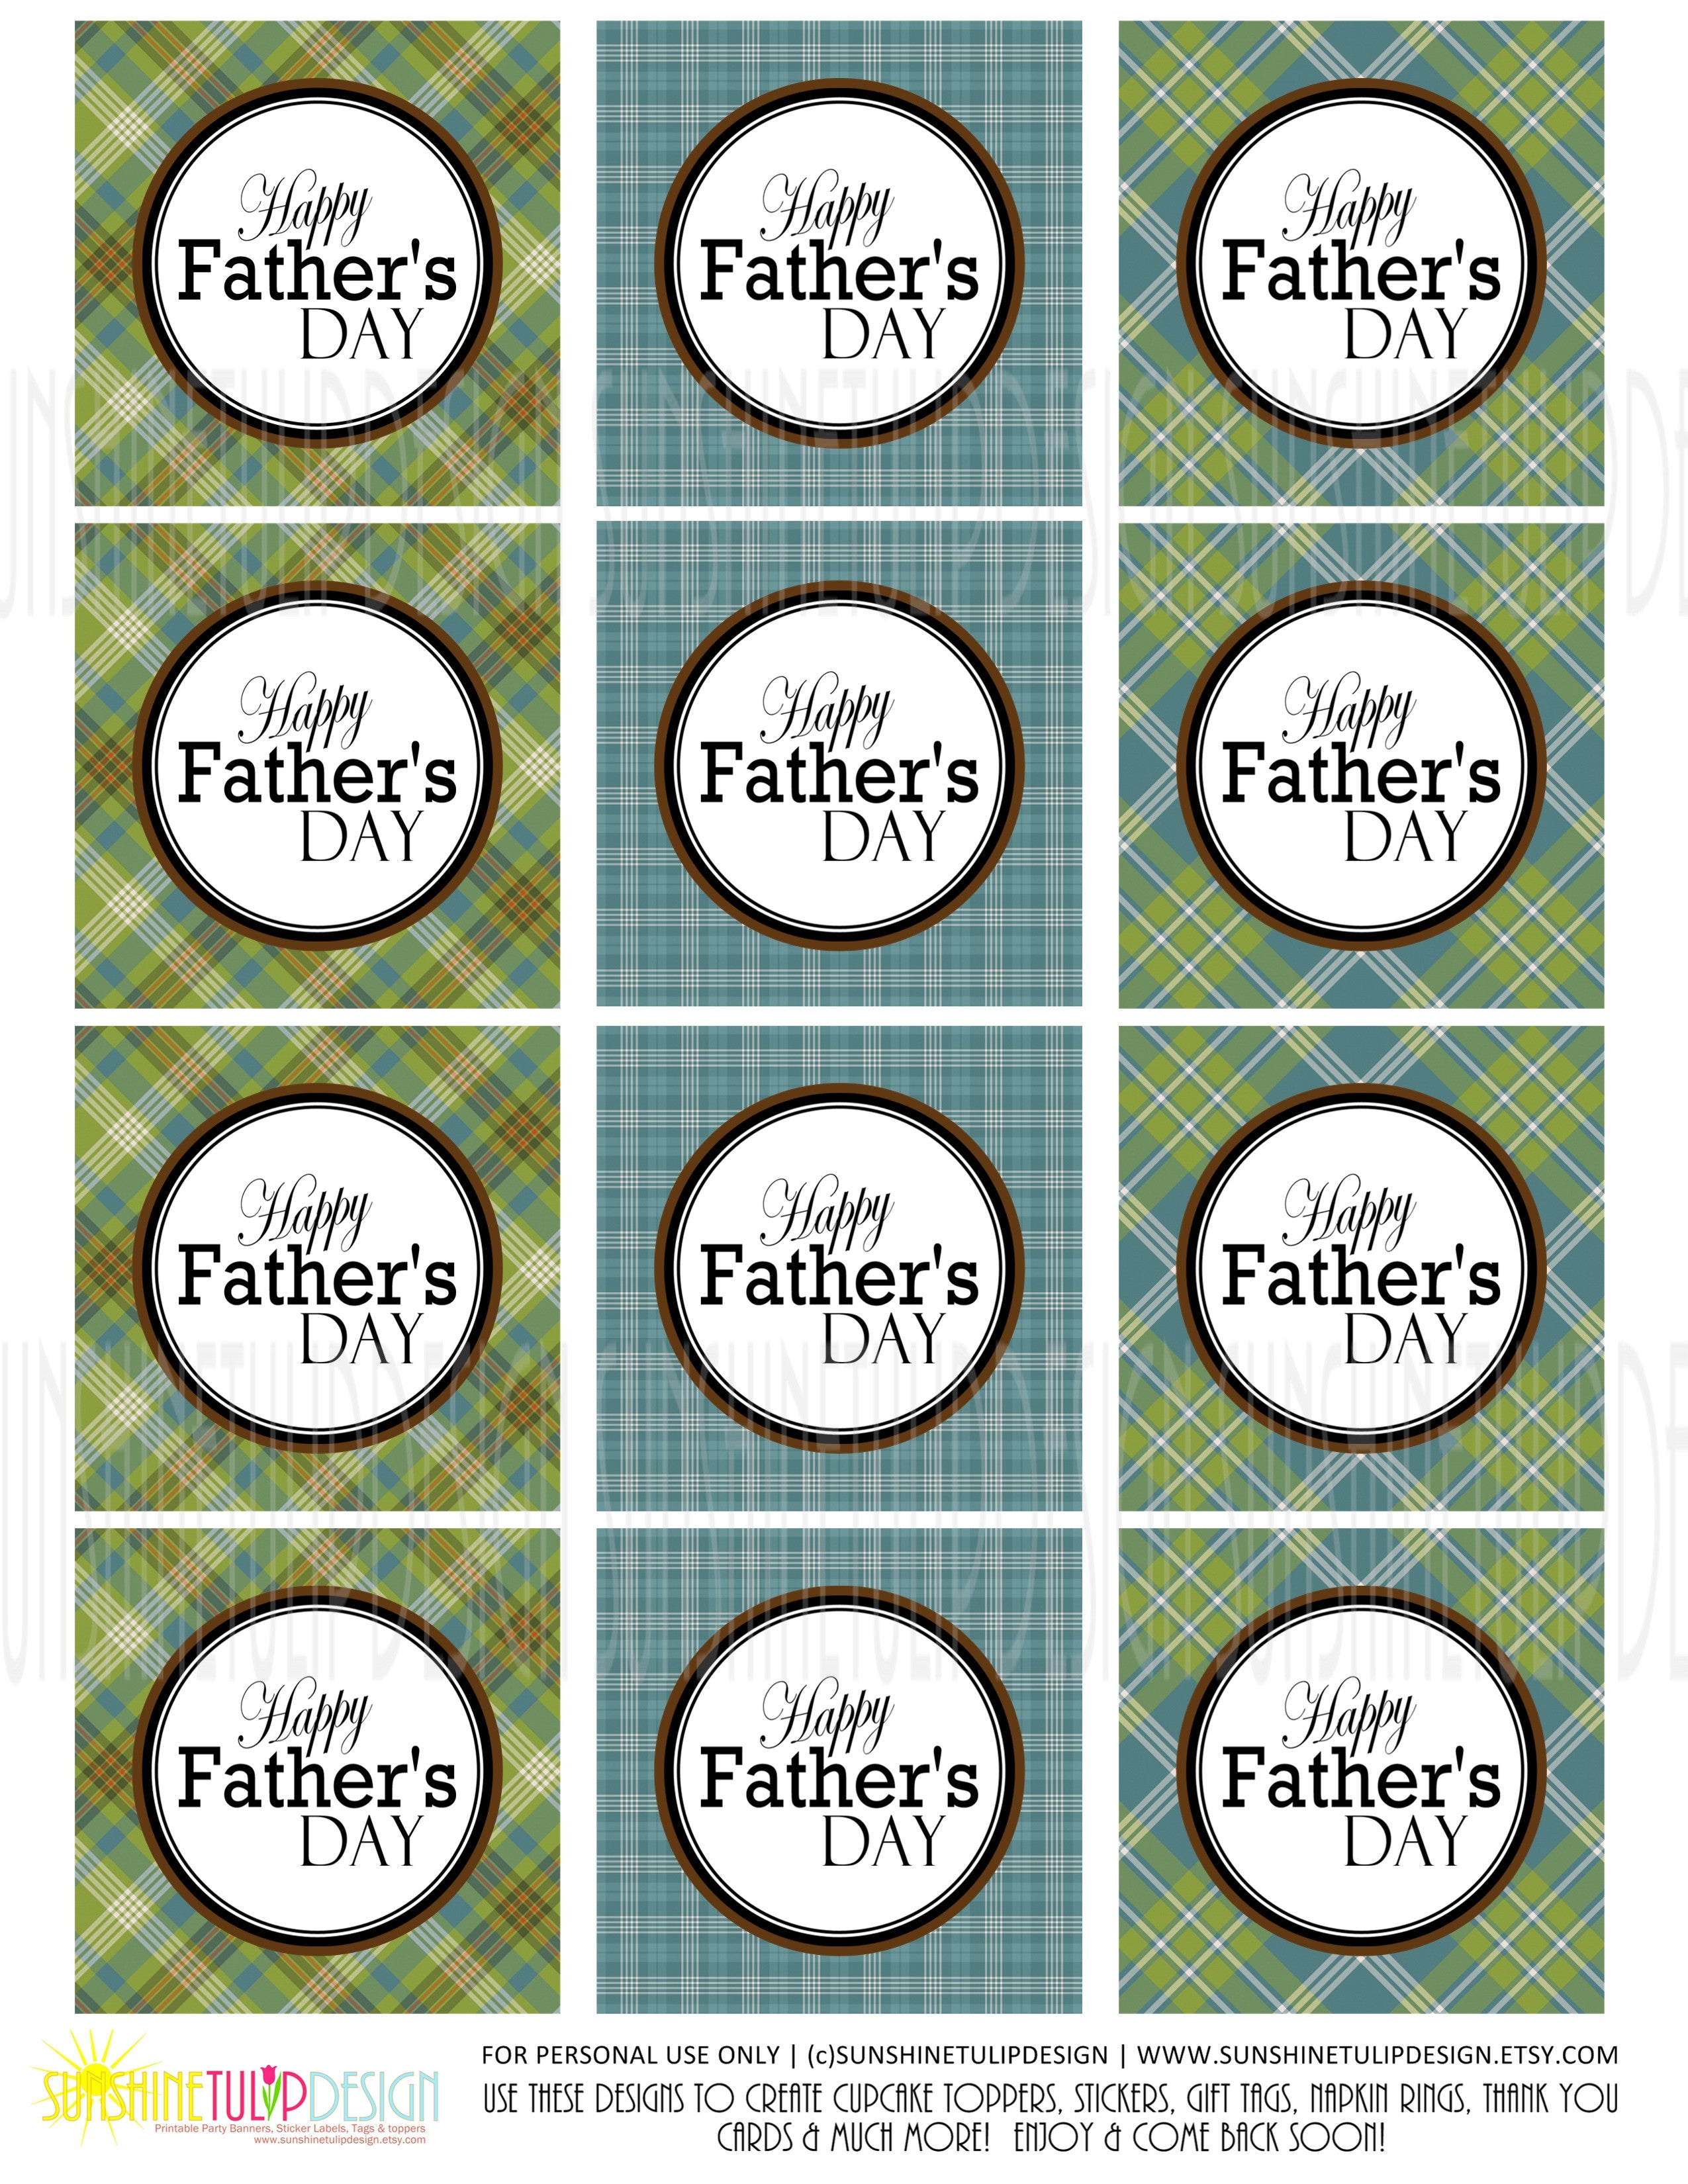 printable-fathers-day-gift-tags-printable-plaid-happy-father-s-day-cu